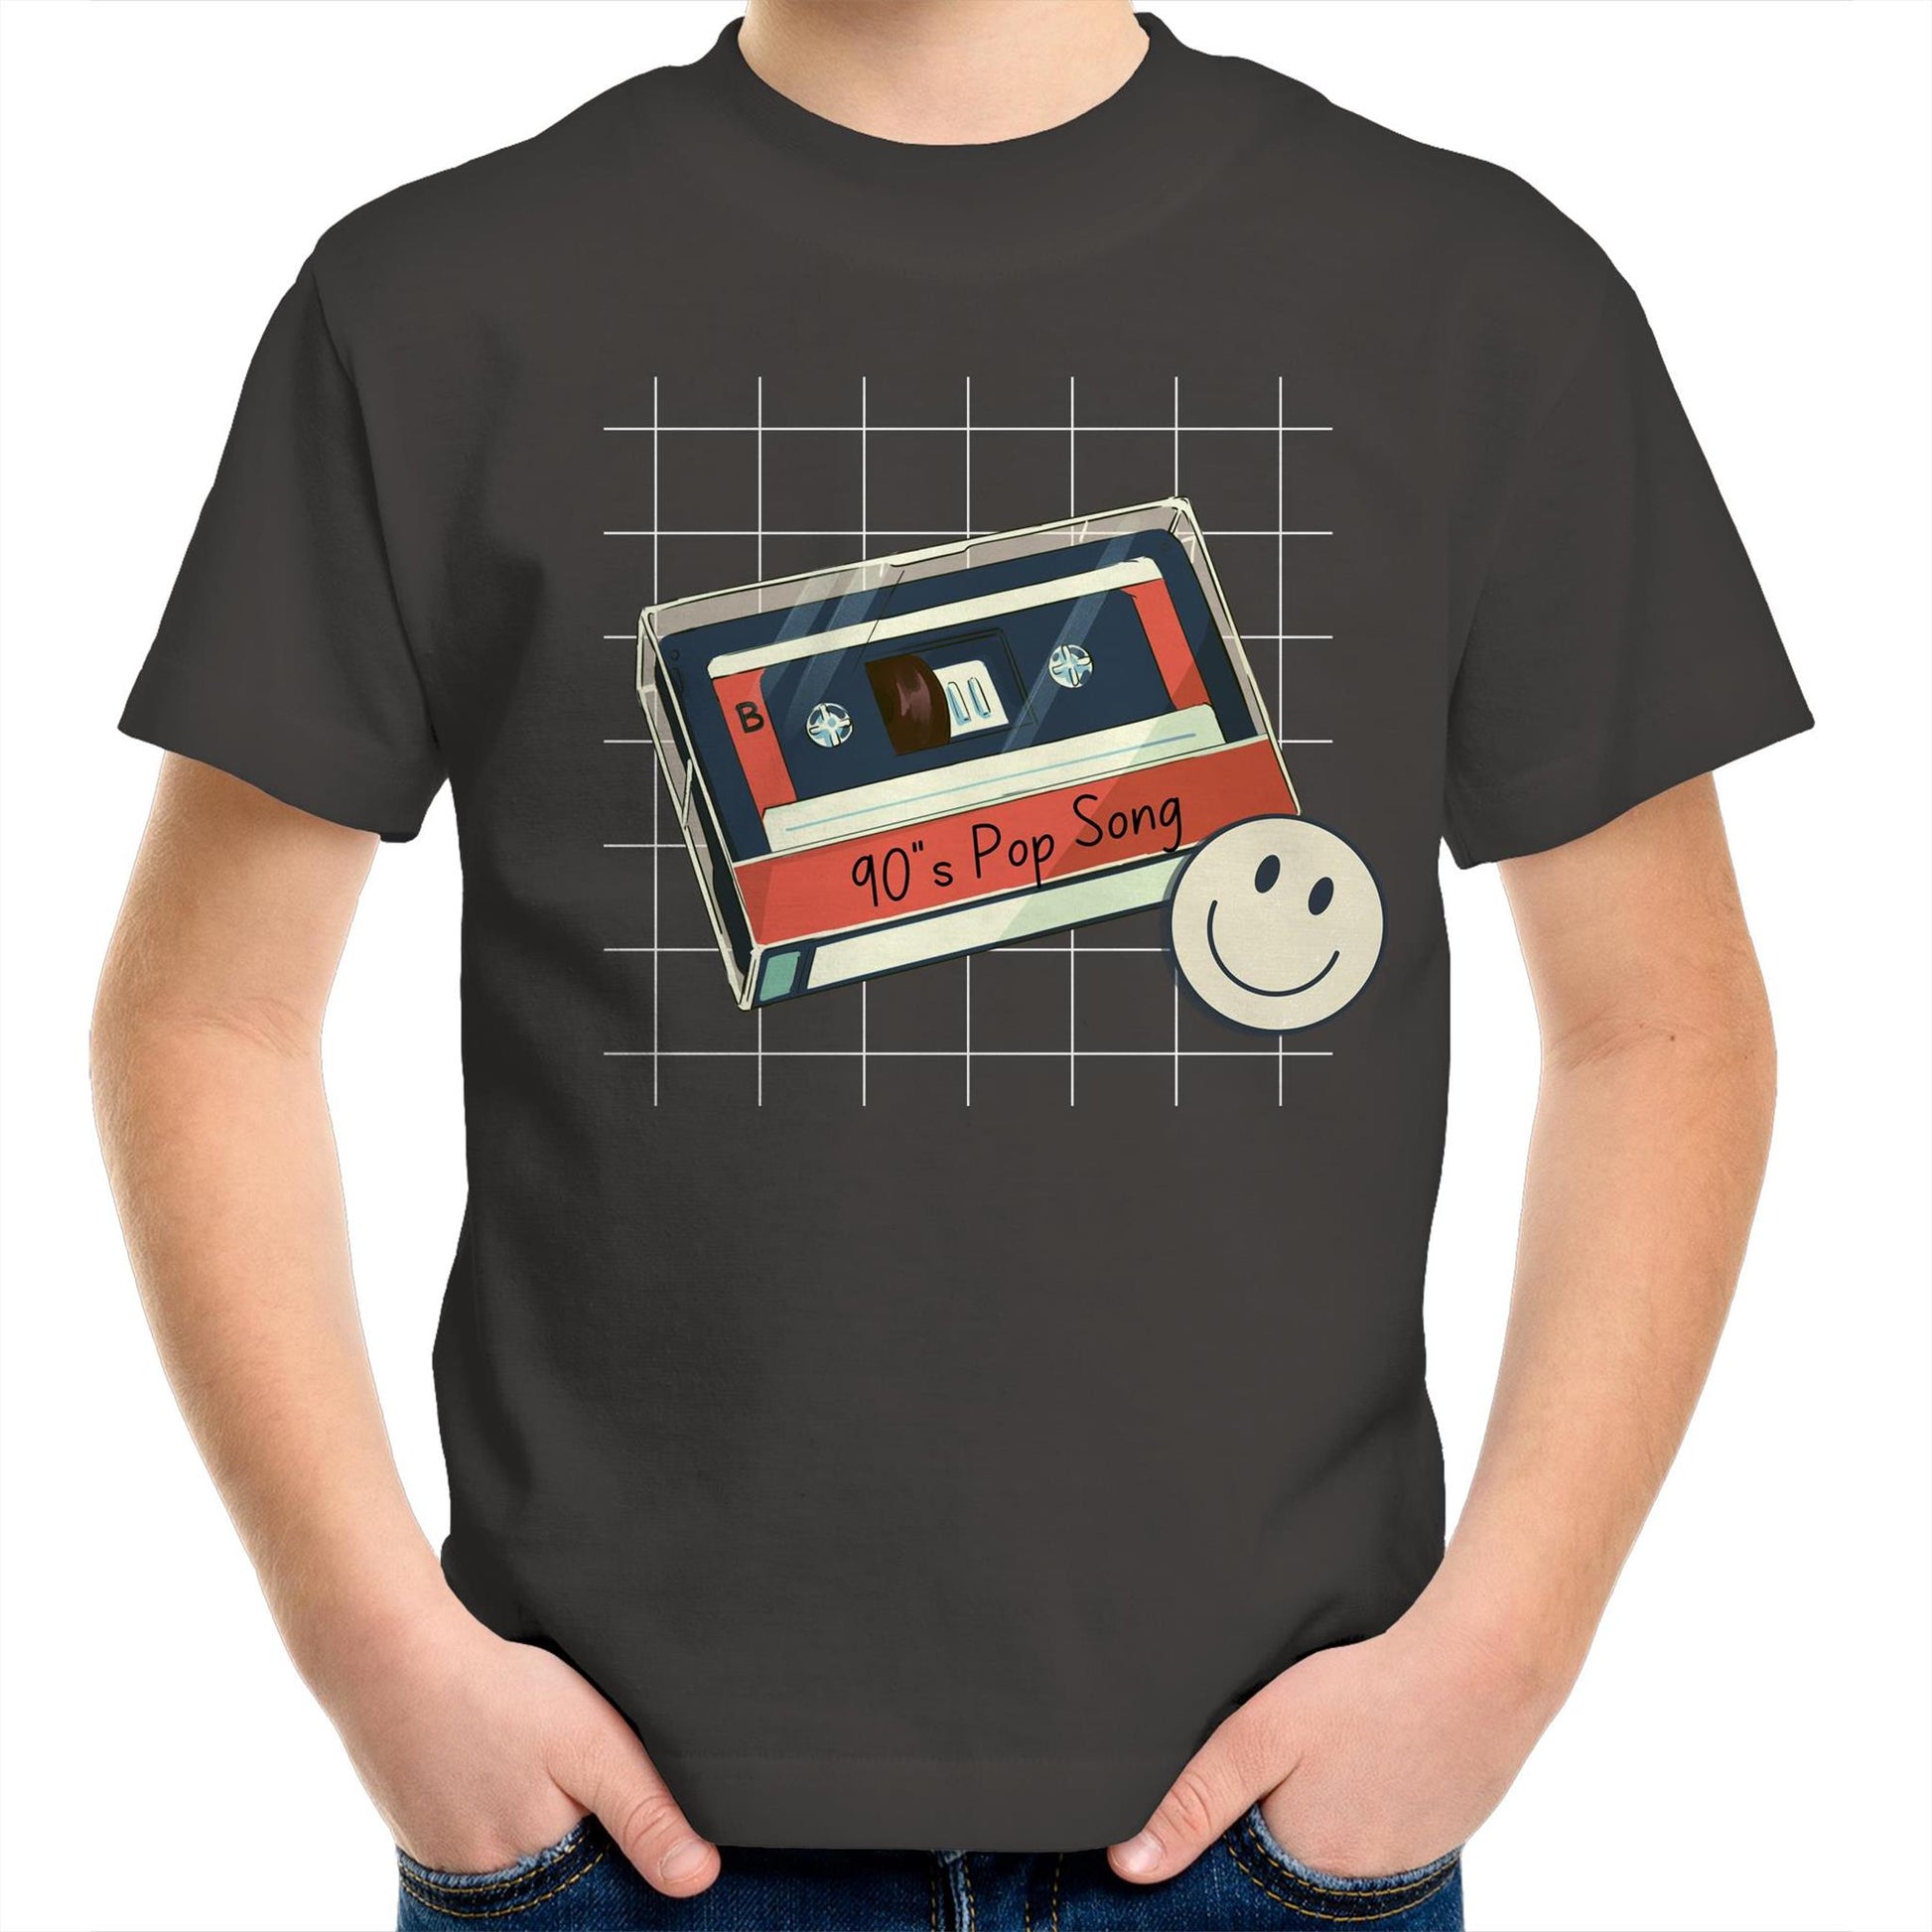 90's Pop Song - Kids Youth Crew T-Shirt Charcoal Kids Youth T-shirt Music Retro